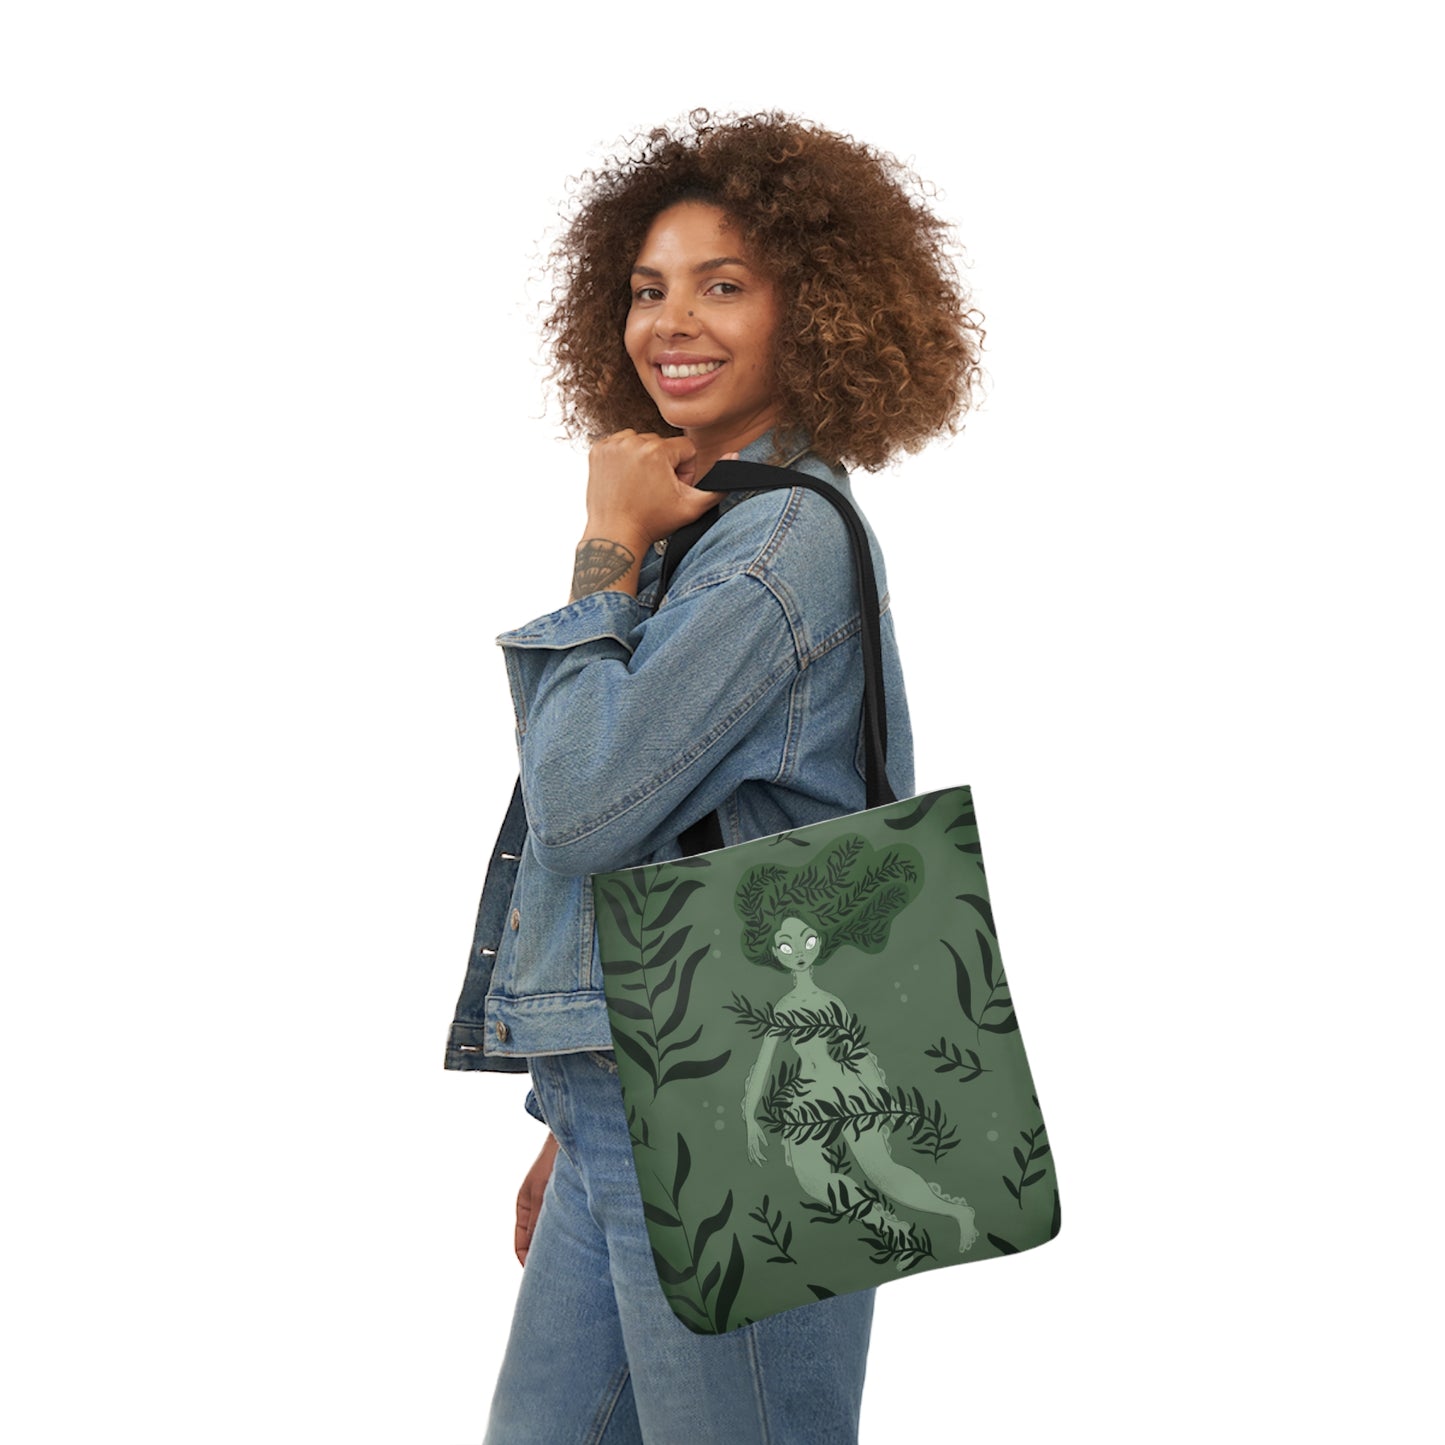 She Creature Tote Bag / "Out of Your League" Tote Bag / Halloween Tote Bags